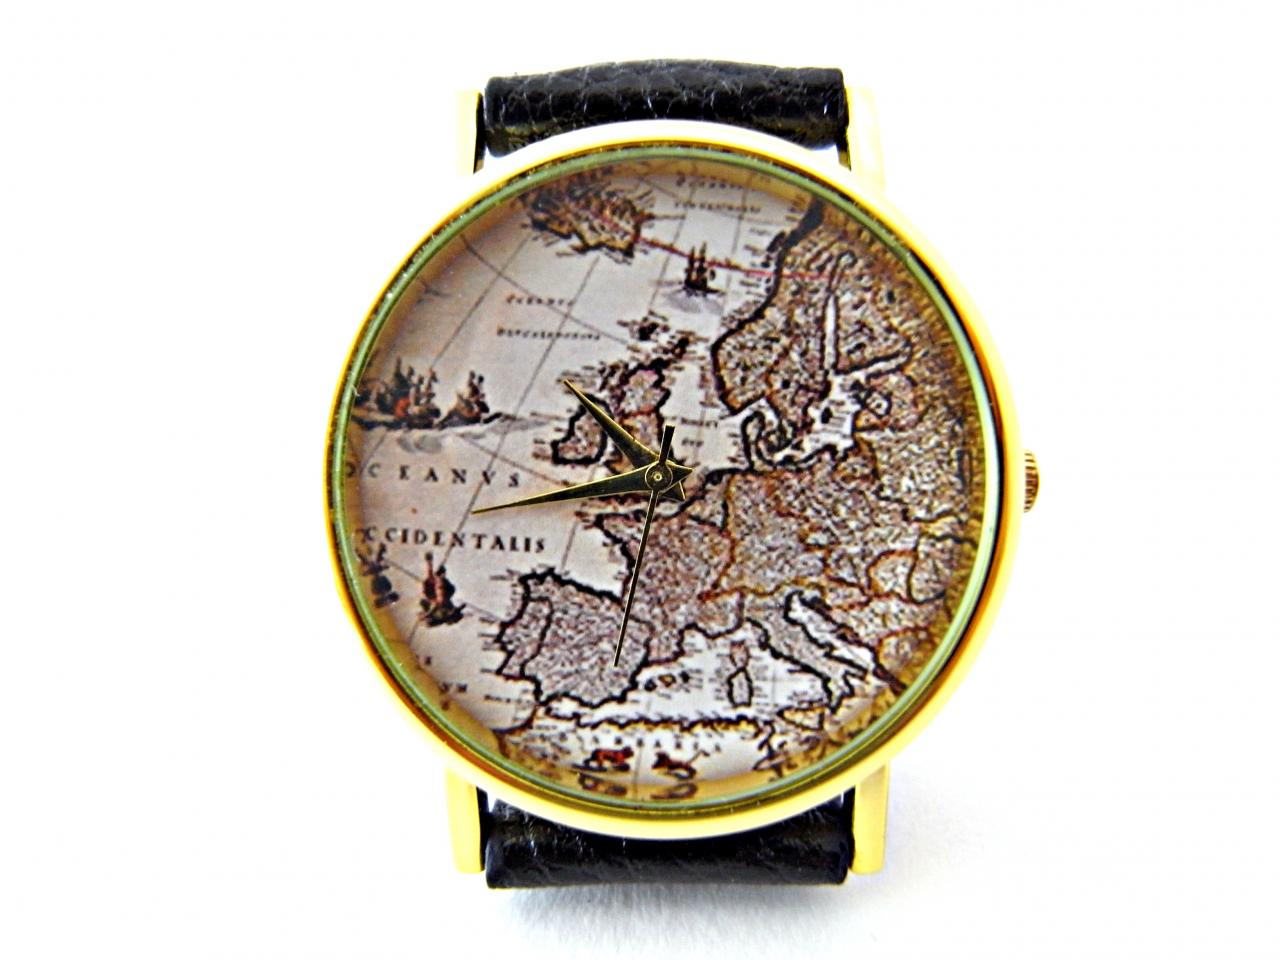 World Map Leather Wrist Watches, Woman Man Lady Unisex Watch, Genuine Leather Handmade Unique Watch #31